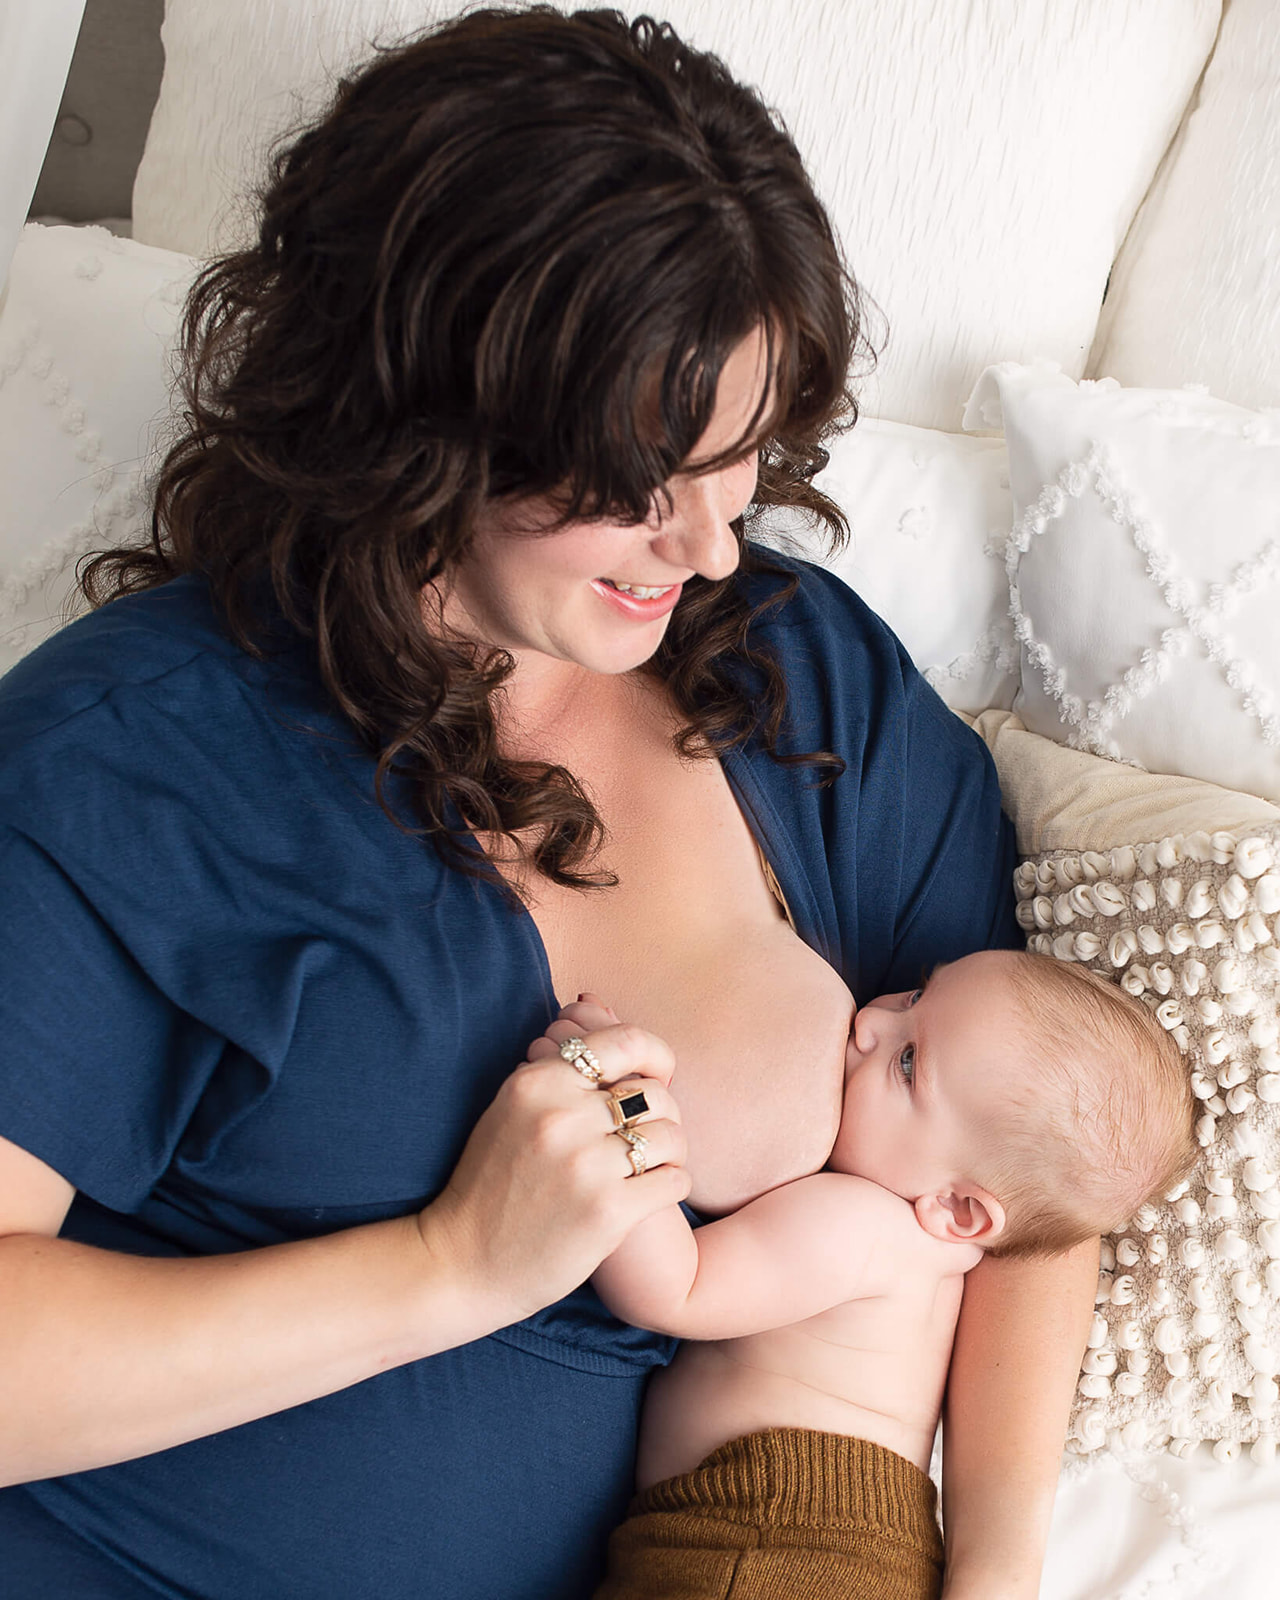 breastfeeding newborn/baby and mother in blue dress indoors on a white bed during breastfeeding photoshoot